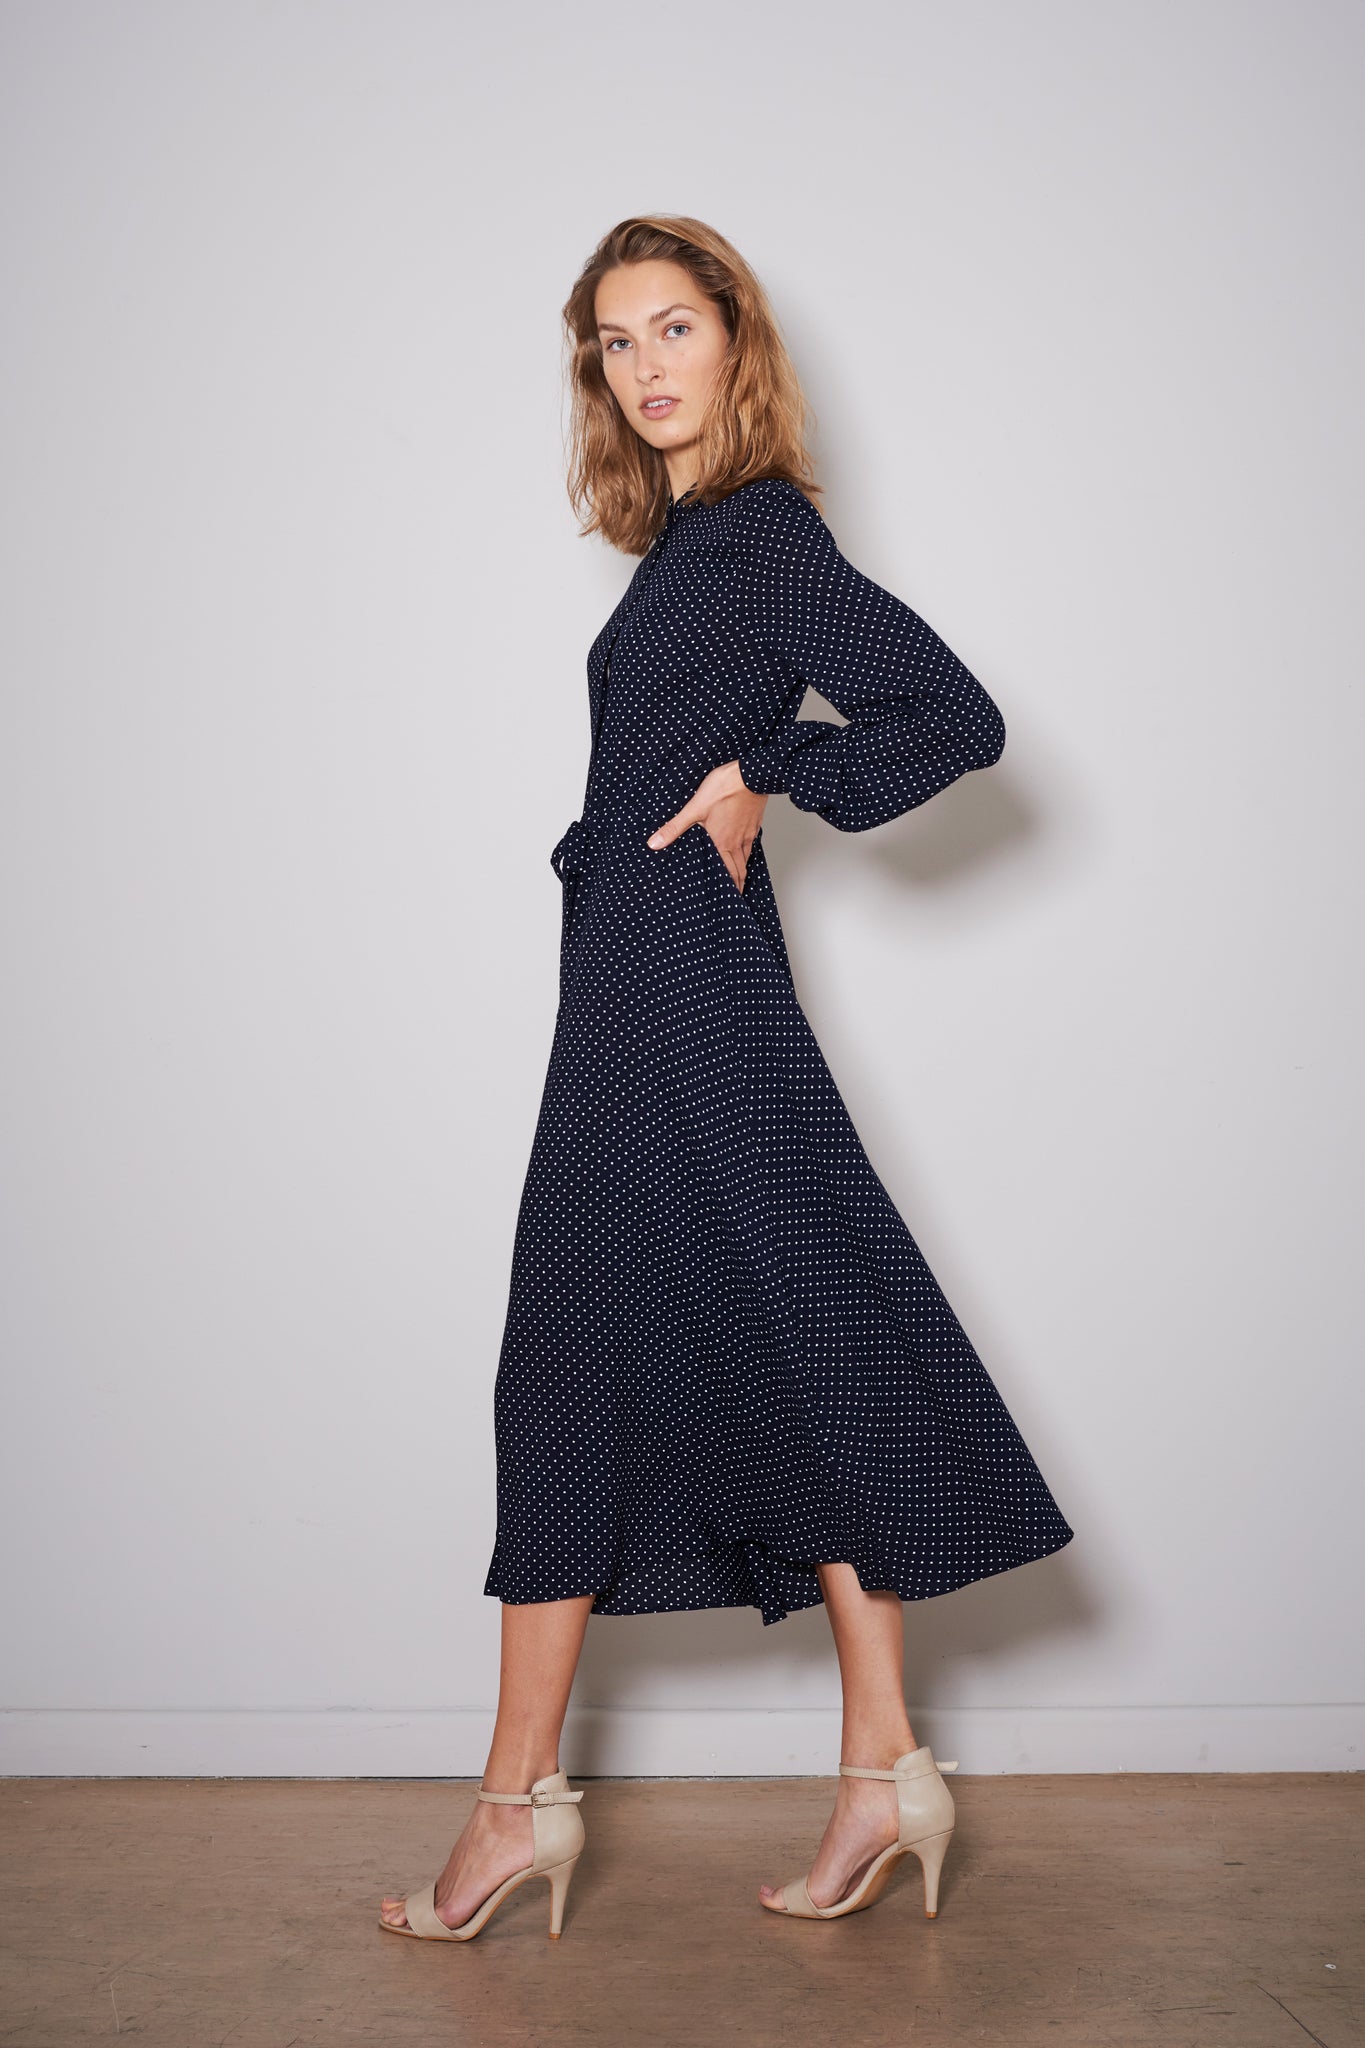 SWAN DRESS navy with white dots viscose